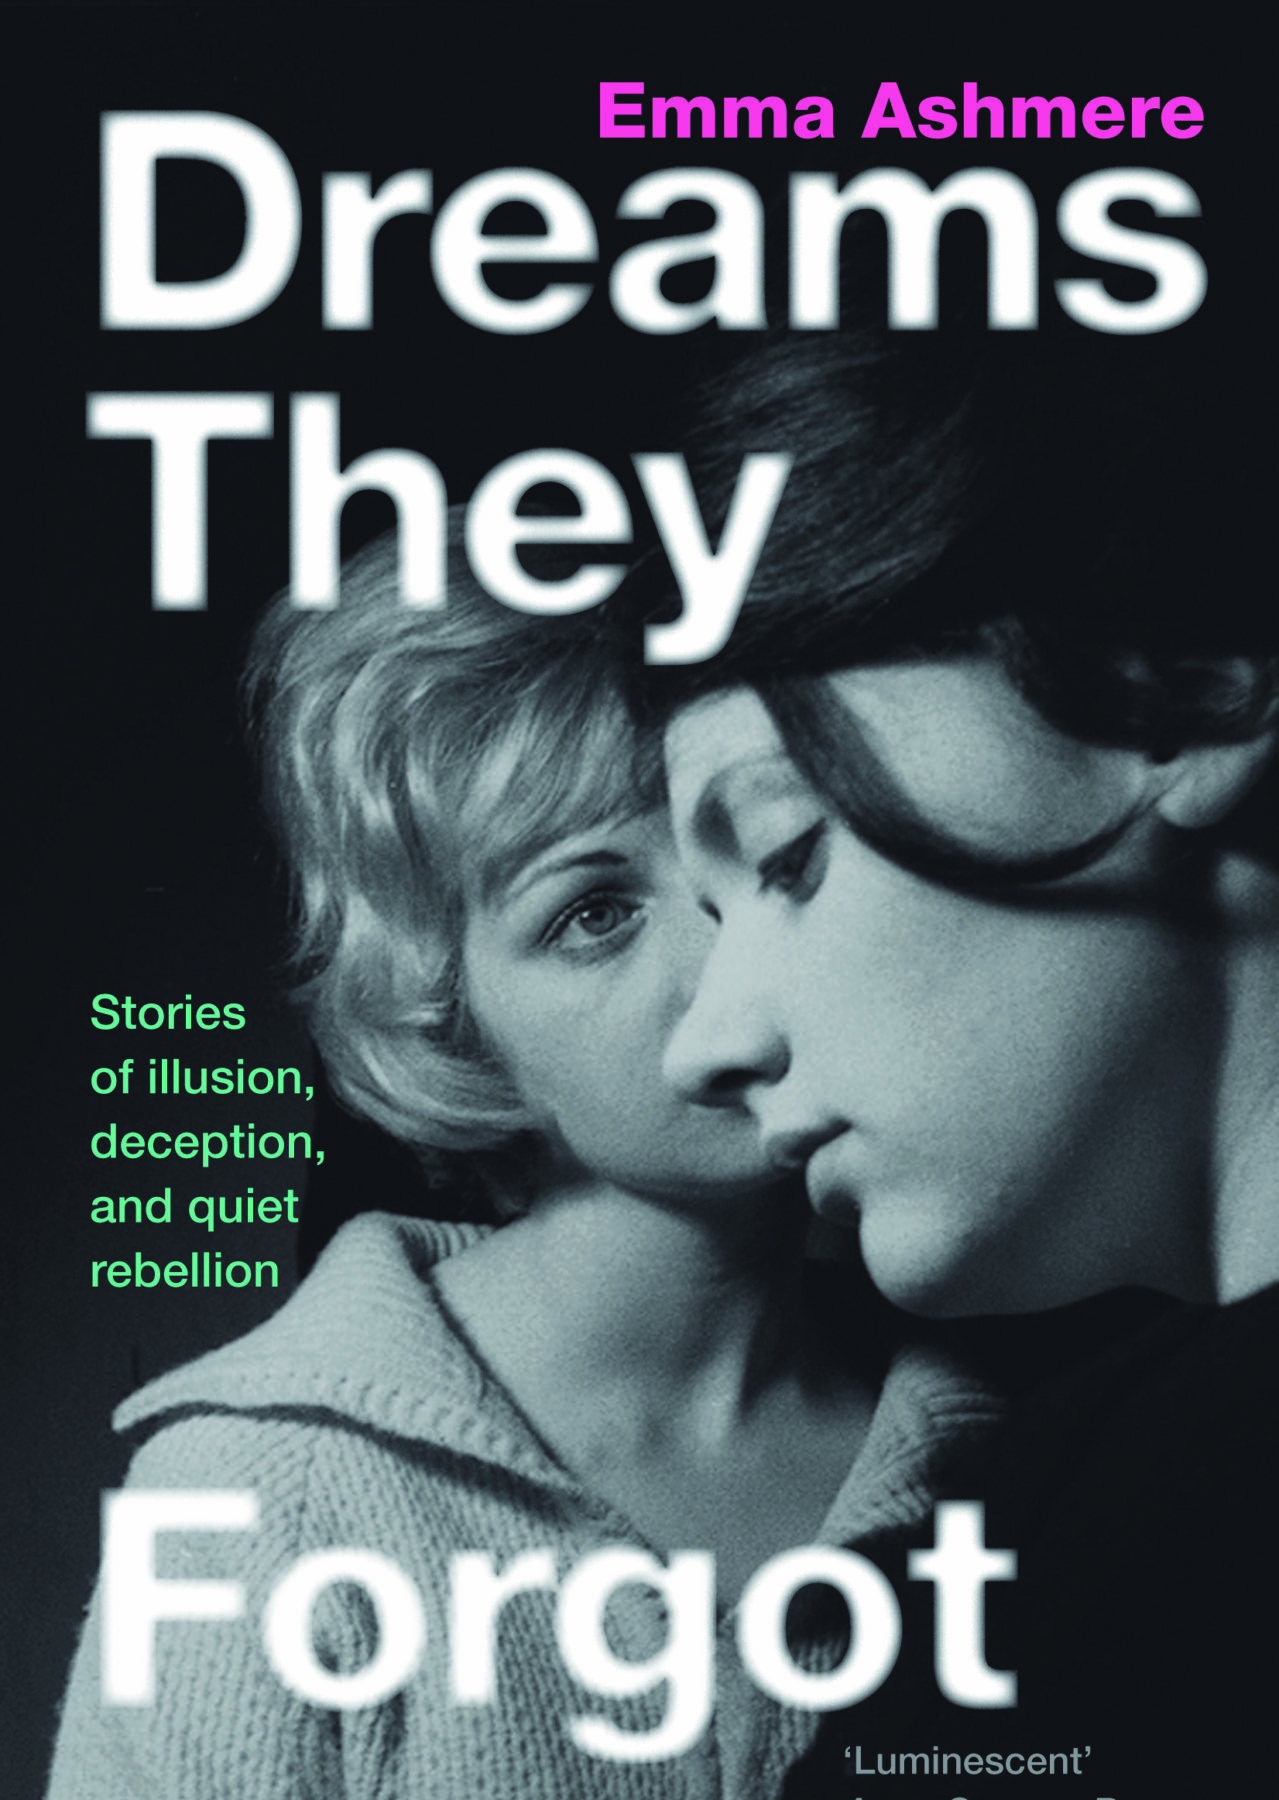 A book cover featuring a black and white photograph of two women one turned side-on in front of the other and looking down, away from her. The title is in white letters with blurred edges